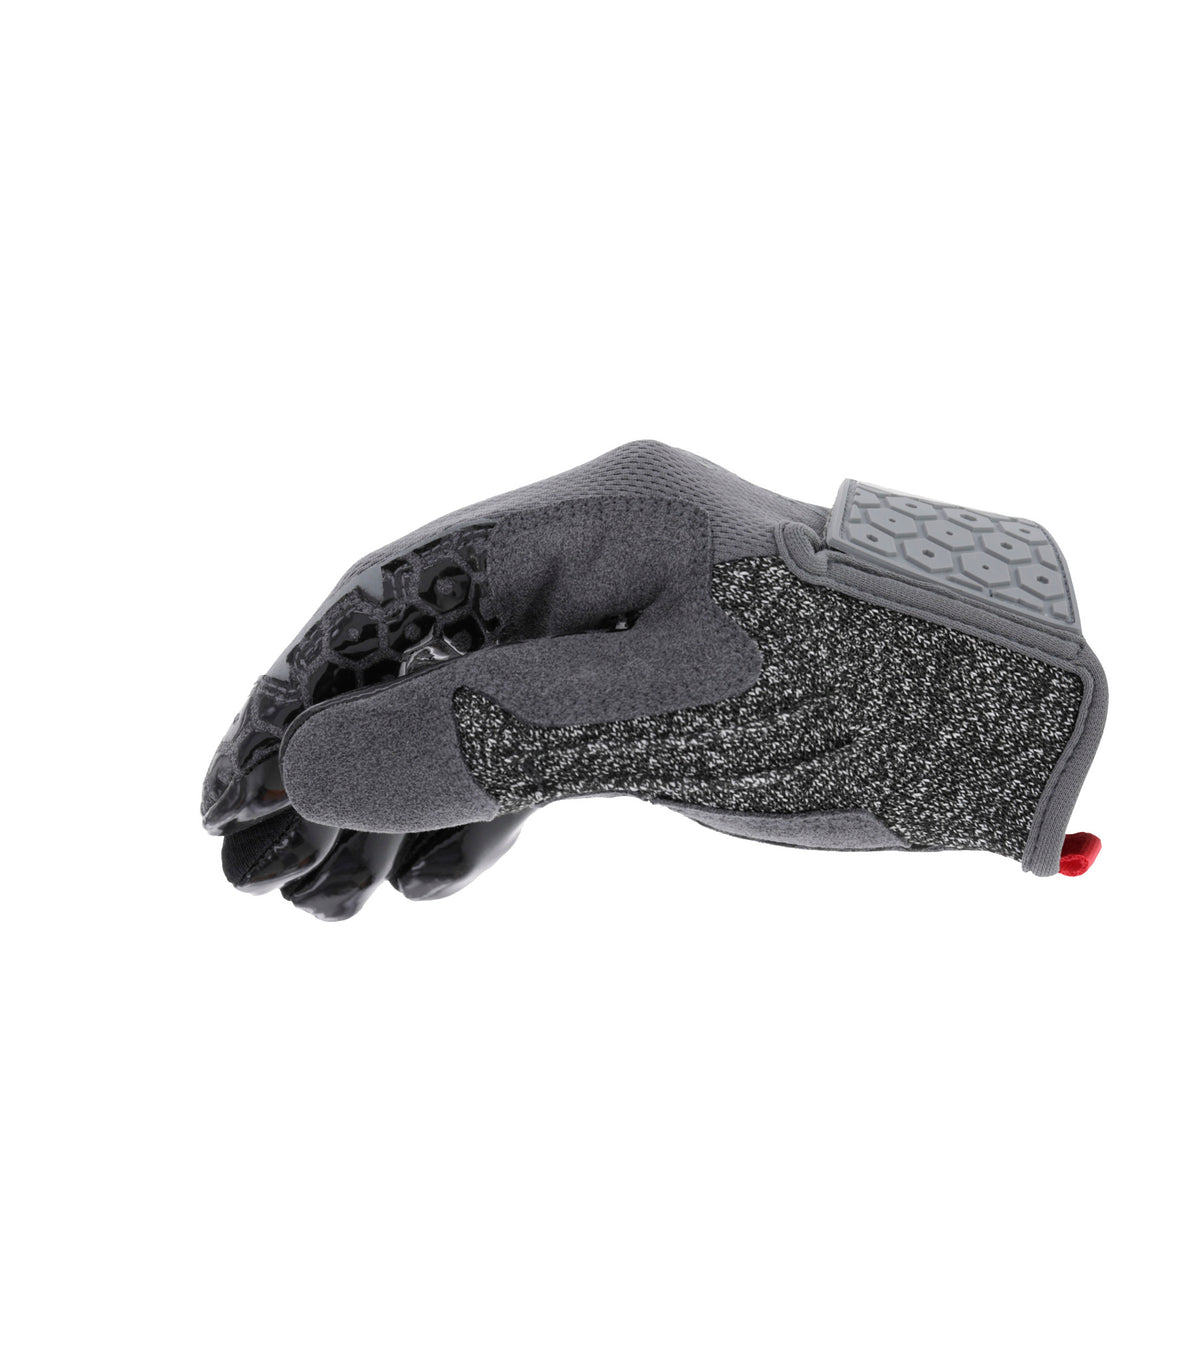 Side profile of the Mechanix Wear Box Cutter™ gloves illustrating the Padlock™ no-slip grip design and cut-resistant thumb area, ideal for industrial applications.